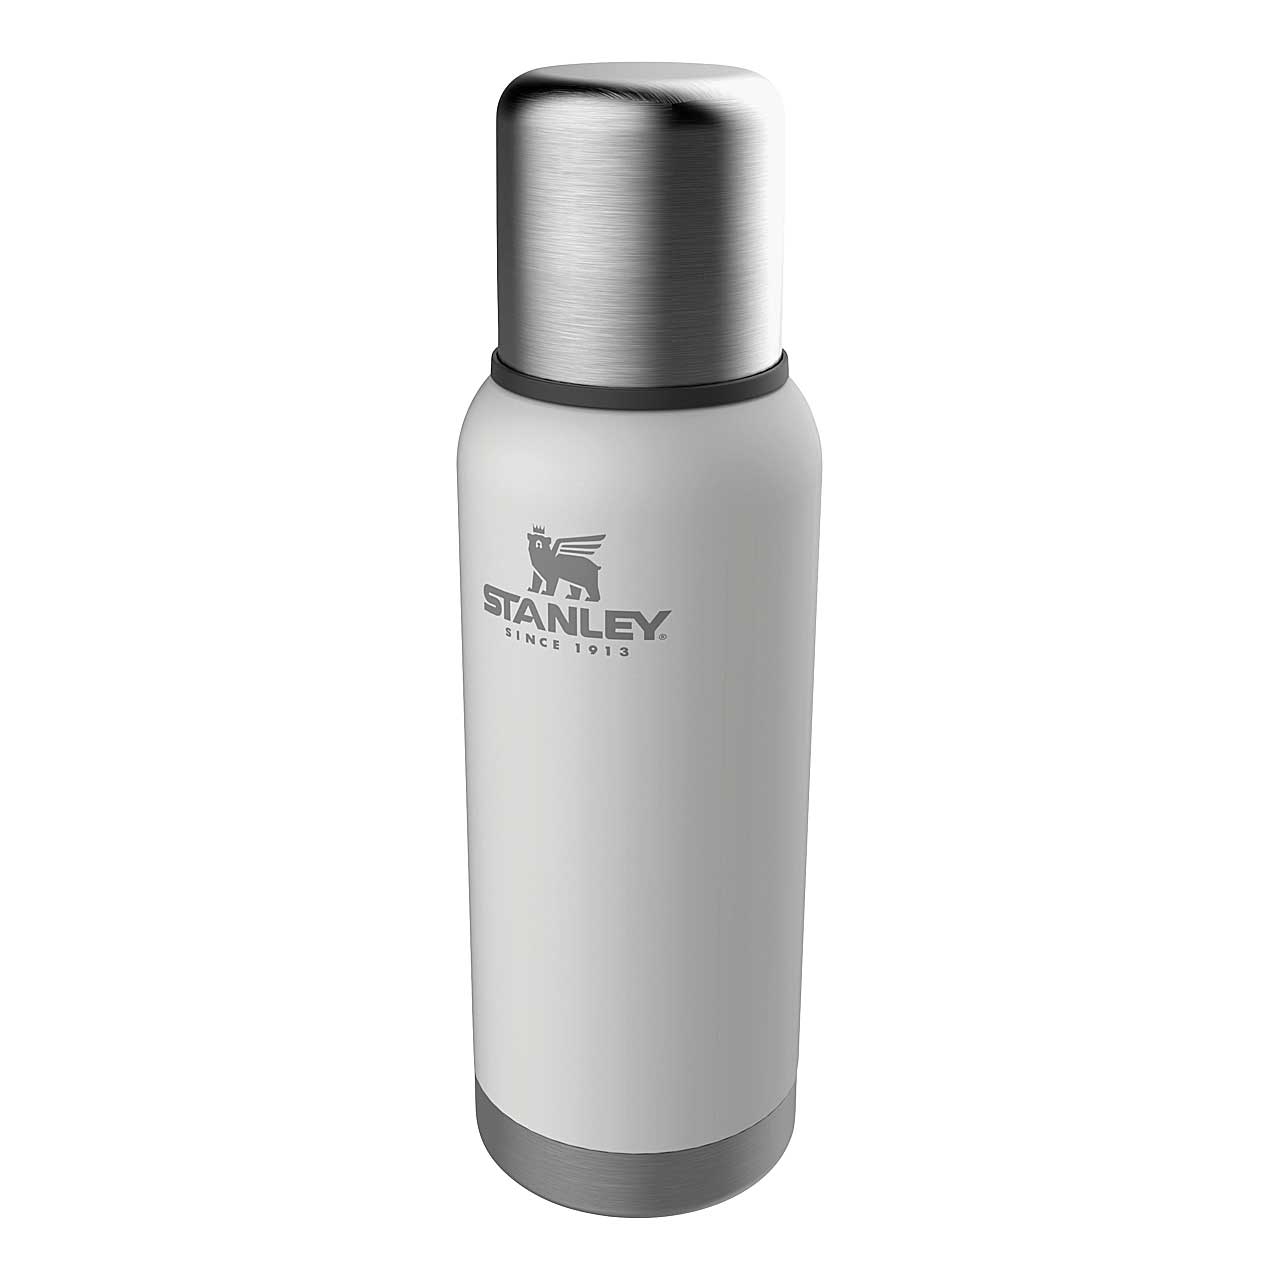 Image of Stanley Adventure Stainless Steel Vacuum Insulated Bottle - 0.73 liter - Polar